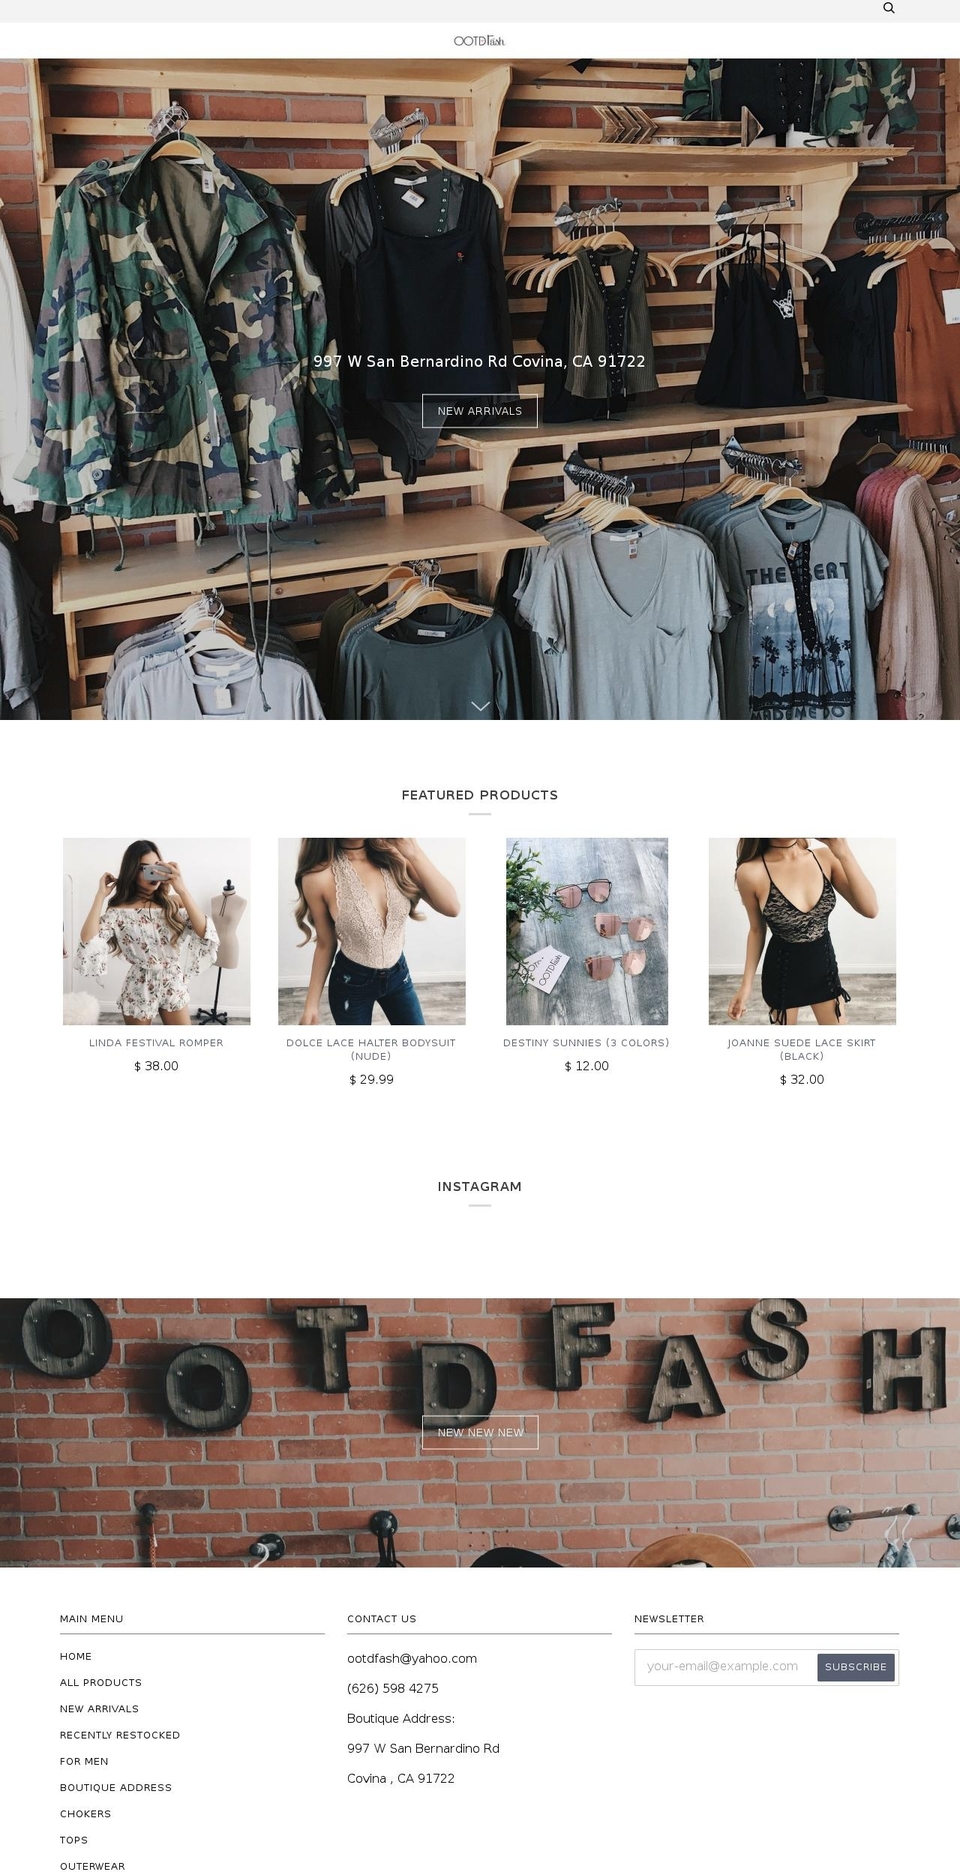 Mr Parker Shopify theme site example ootdfash.com